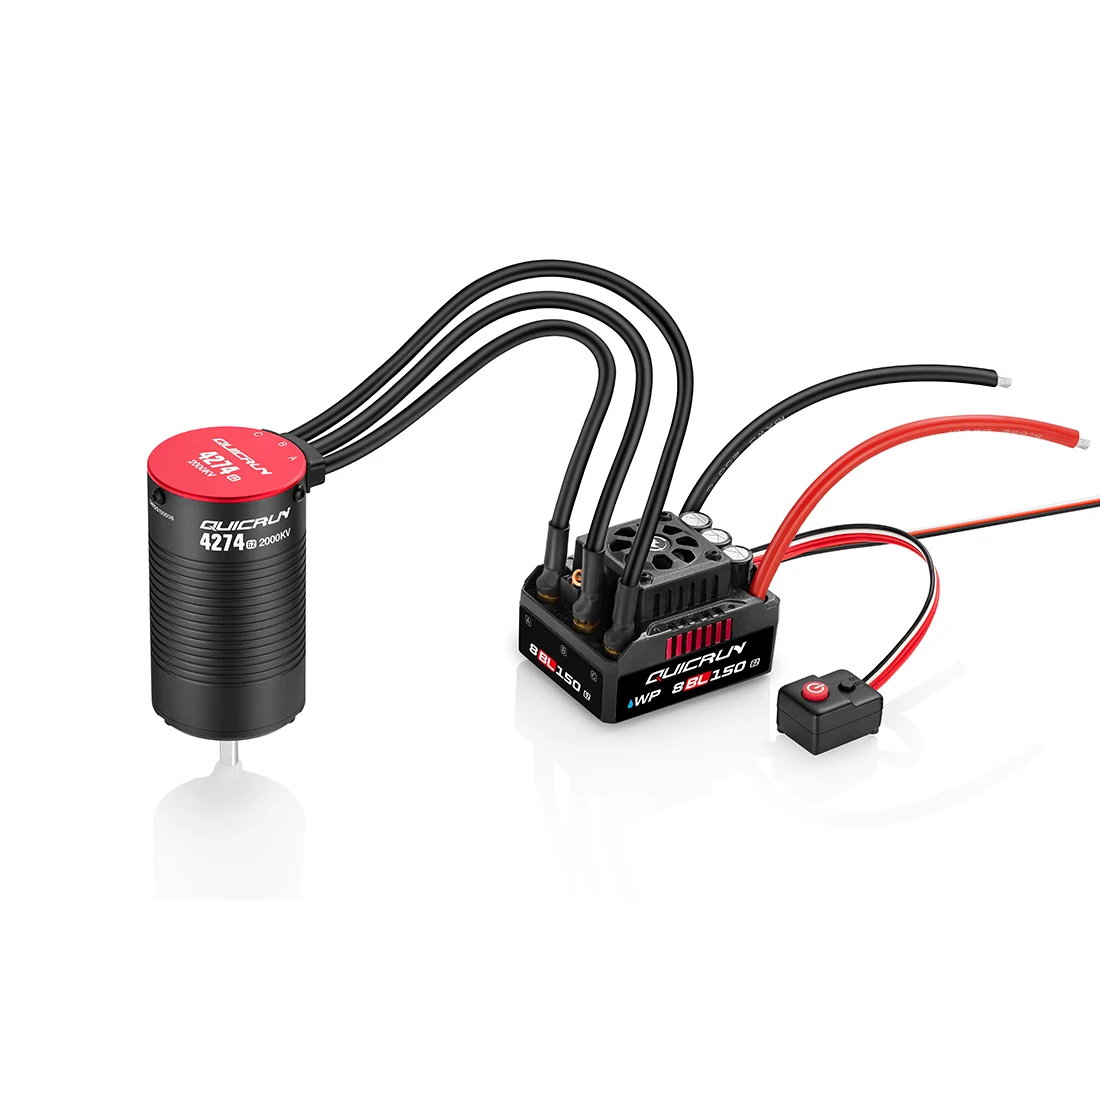 

Hobbywing QuicRun 150A G2 ESC and 4274/4268 brushless motor for 1:8 RC remote control upgrade accessories